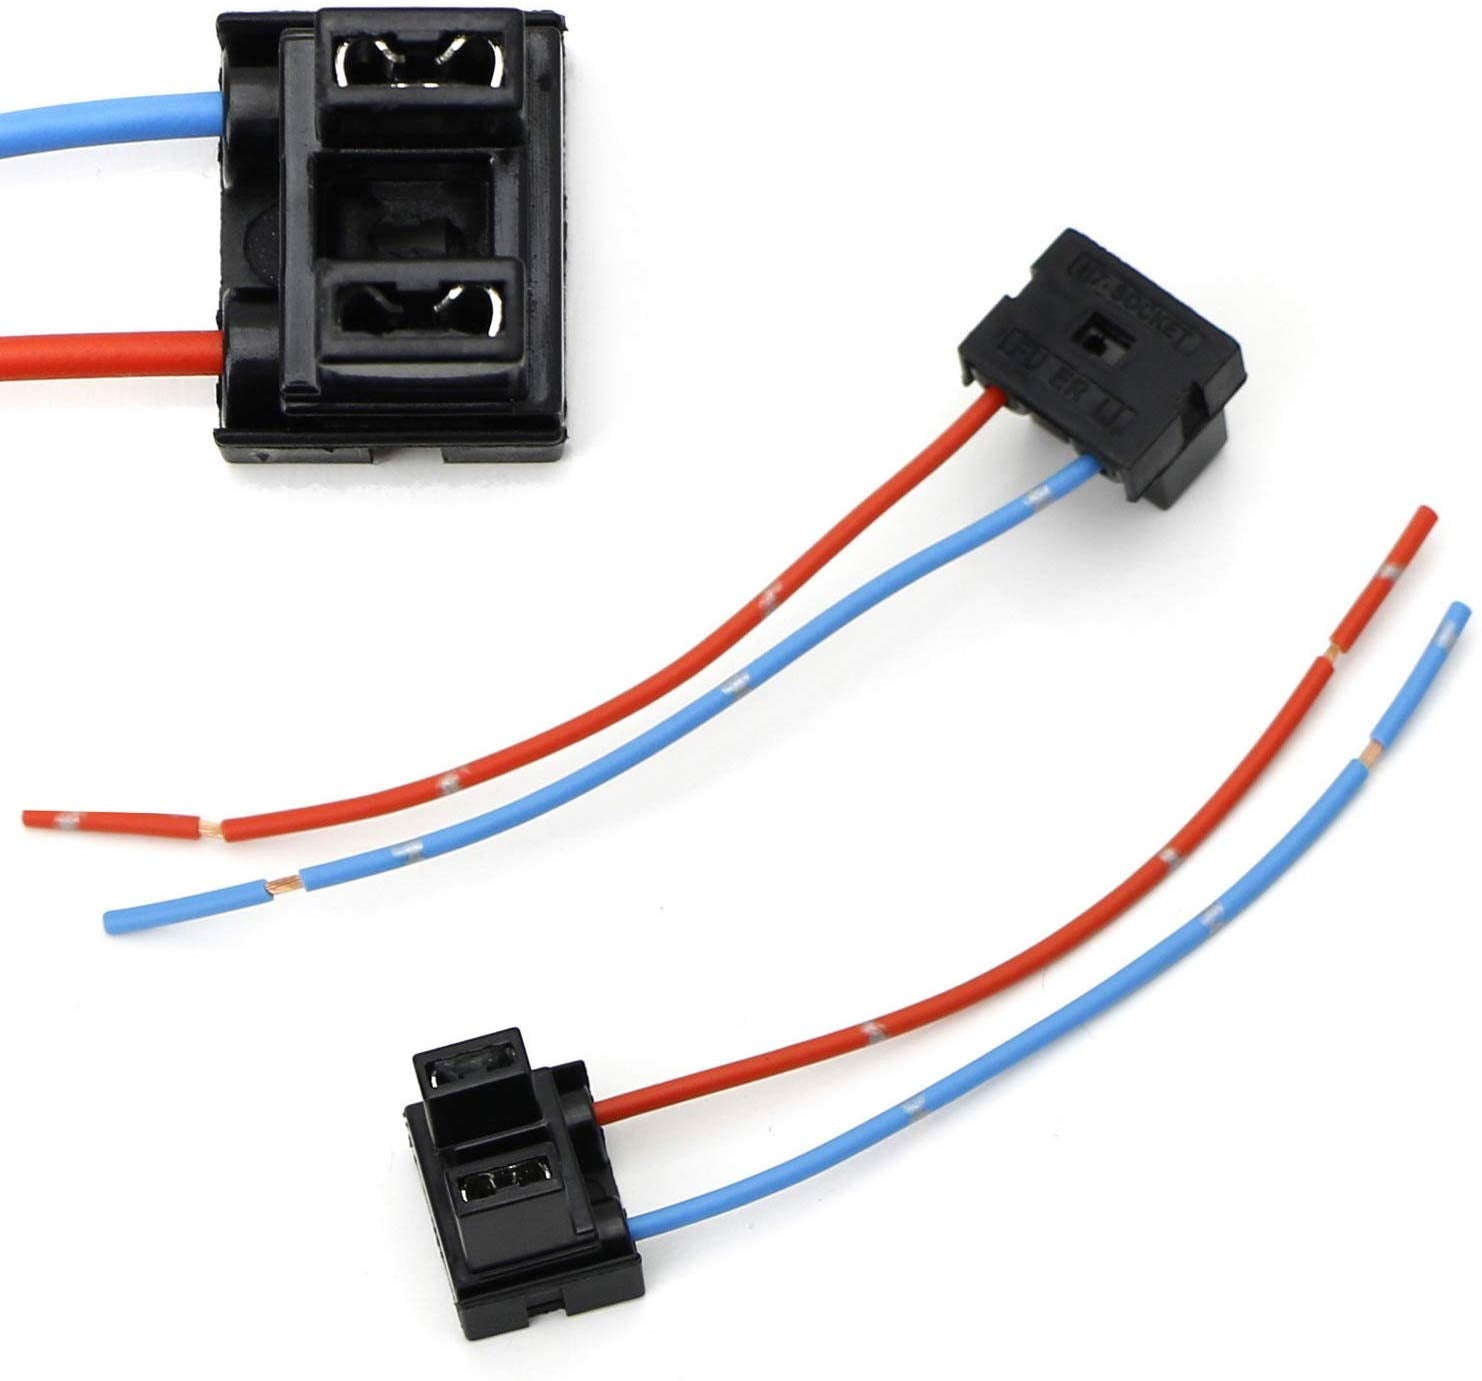 iJDMTOY (2) OEM H7 Female Adapters Wiring Harness Sockets w/ 4-Inch Wire Pigtails For Headlights or Fog Lights Use